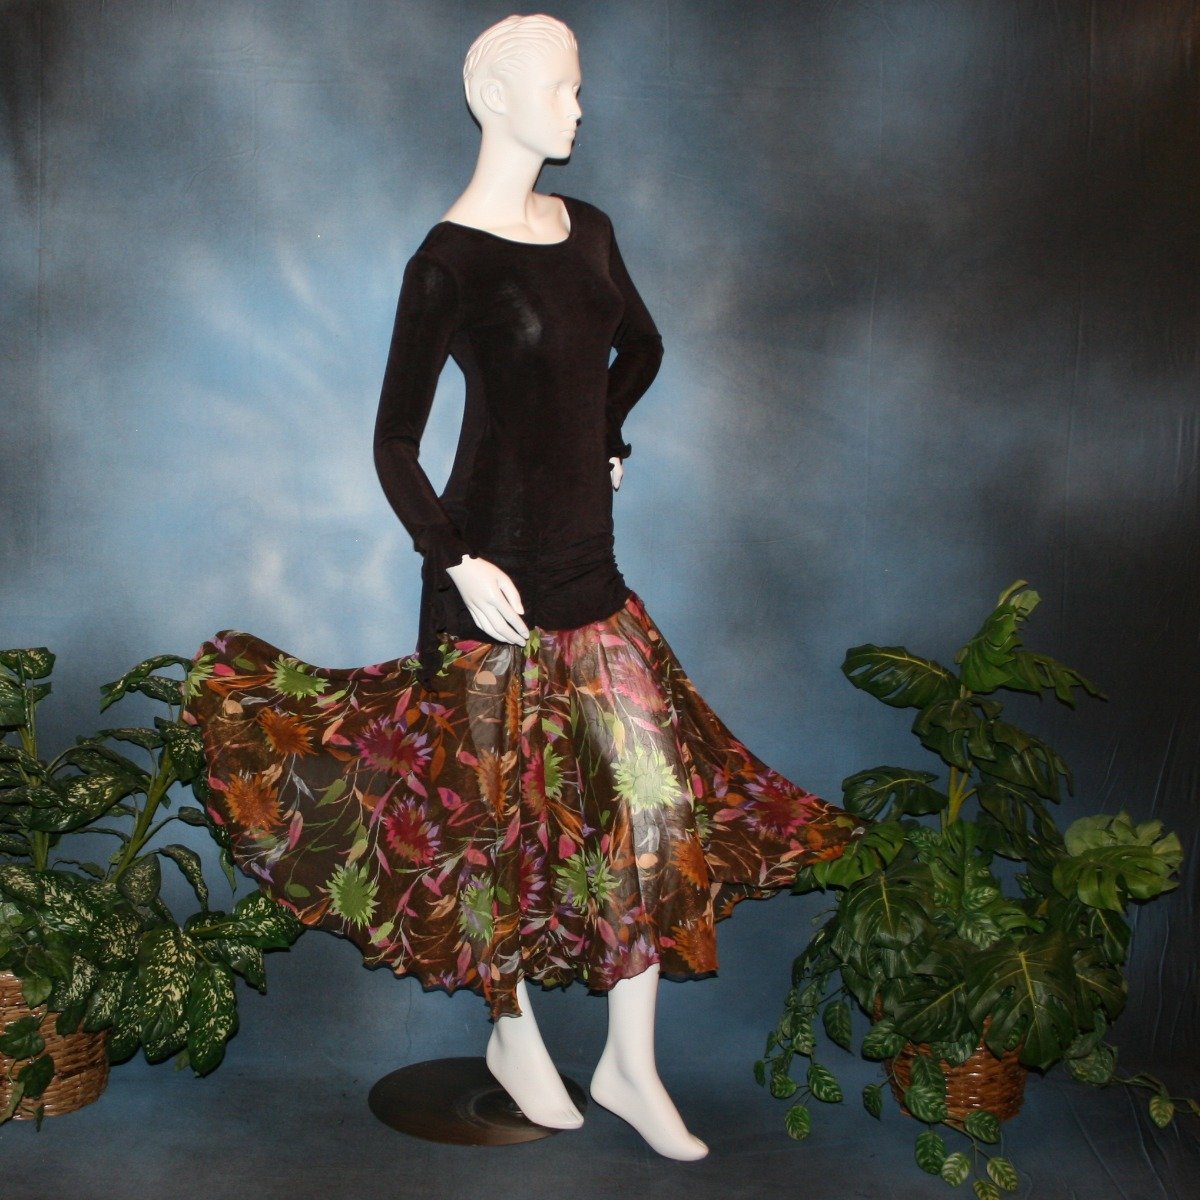 Crystal's Creations side view of Deep chocolate brown social ballroom dress created of luxurious deep chocolate brown solid slinky base featuring ruching through the hip area, & interesting long flared sleeves, with yards of fall colored flowers chiffon petal panels